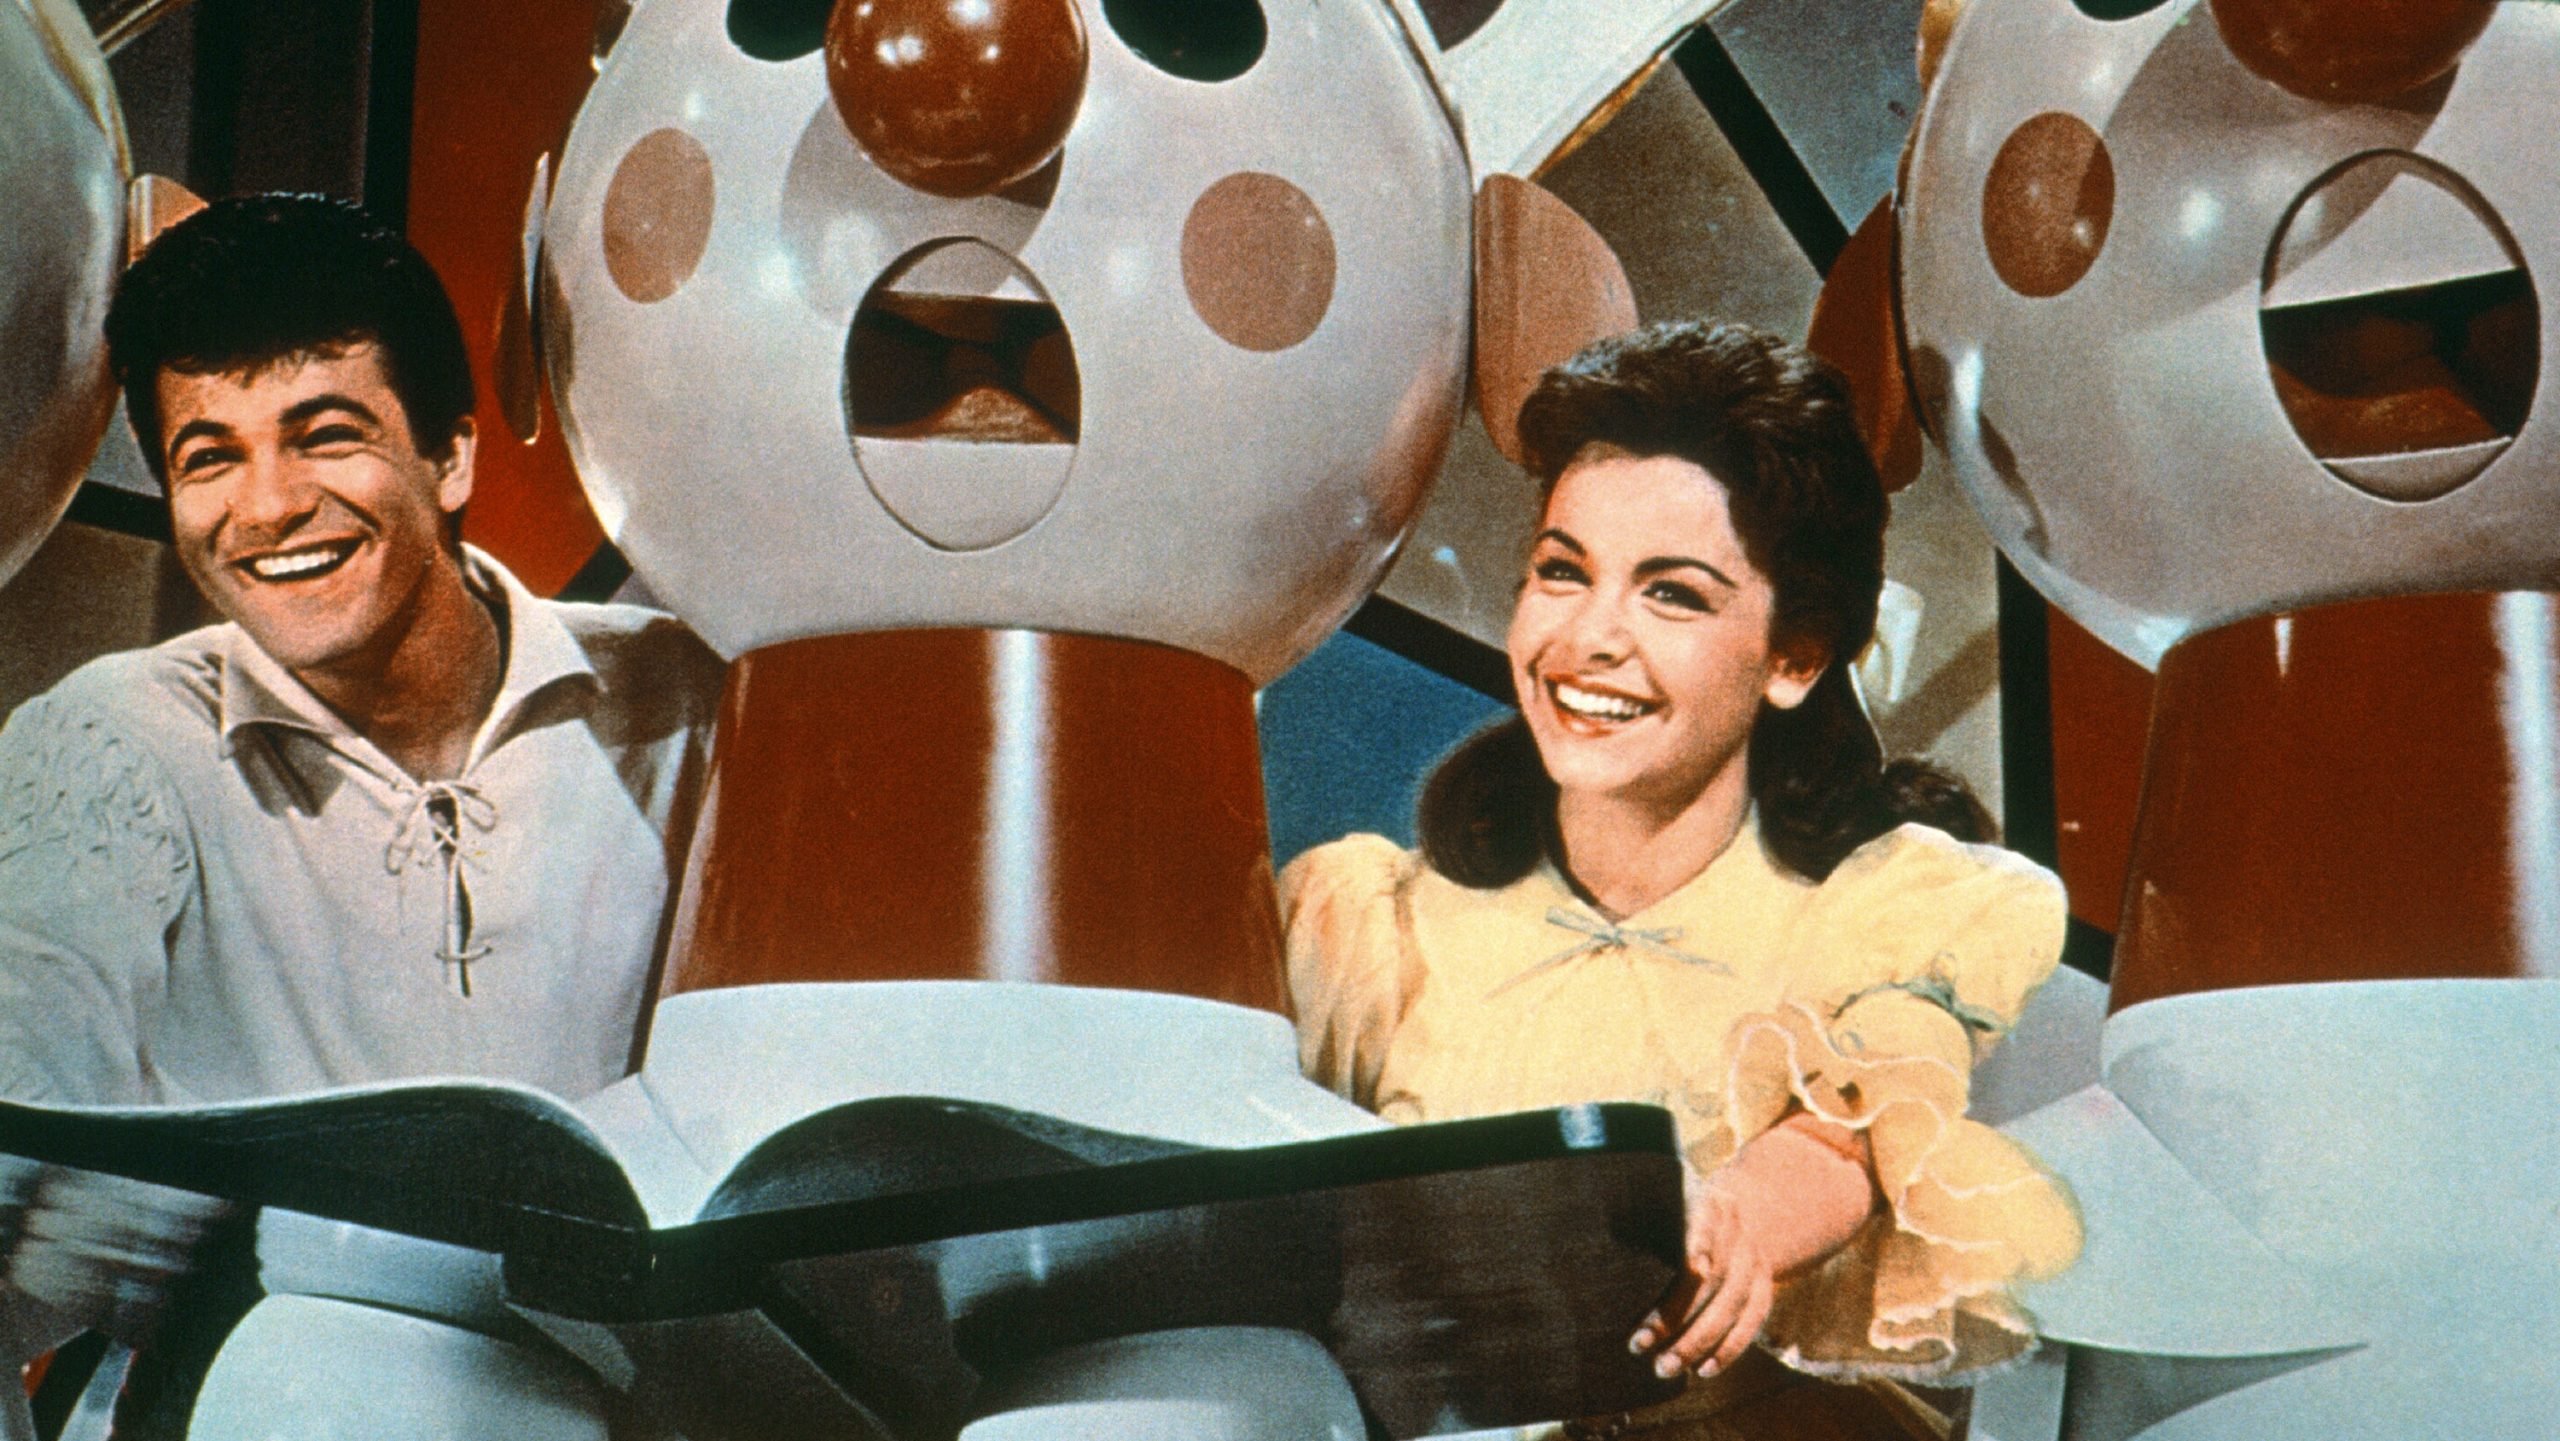 annette-funicello-babes-in-toyland